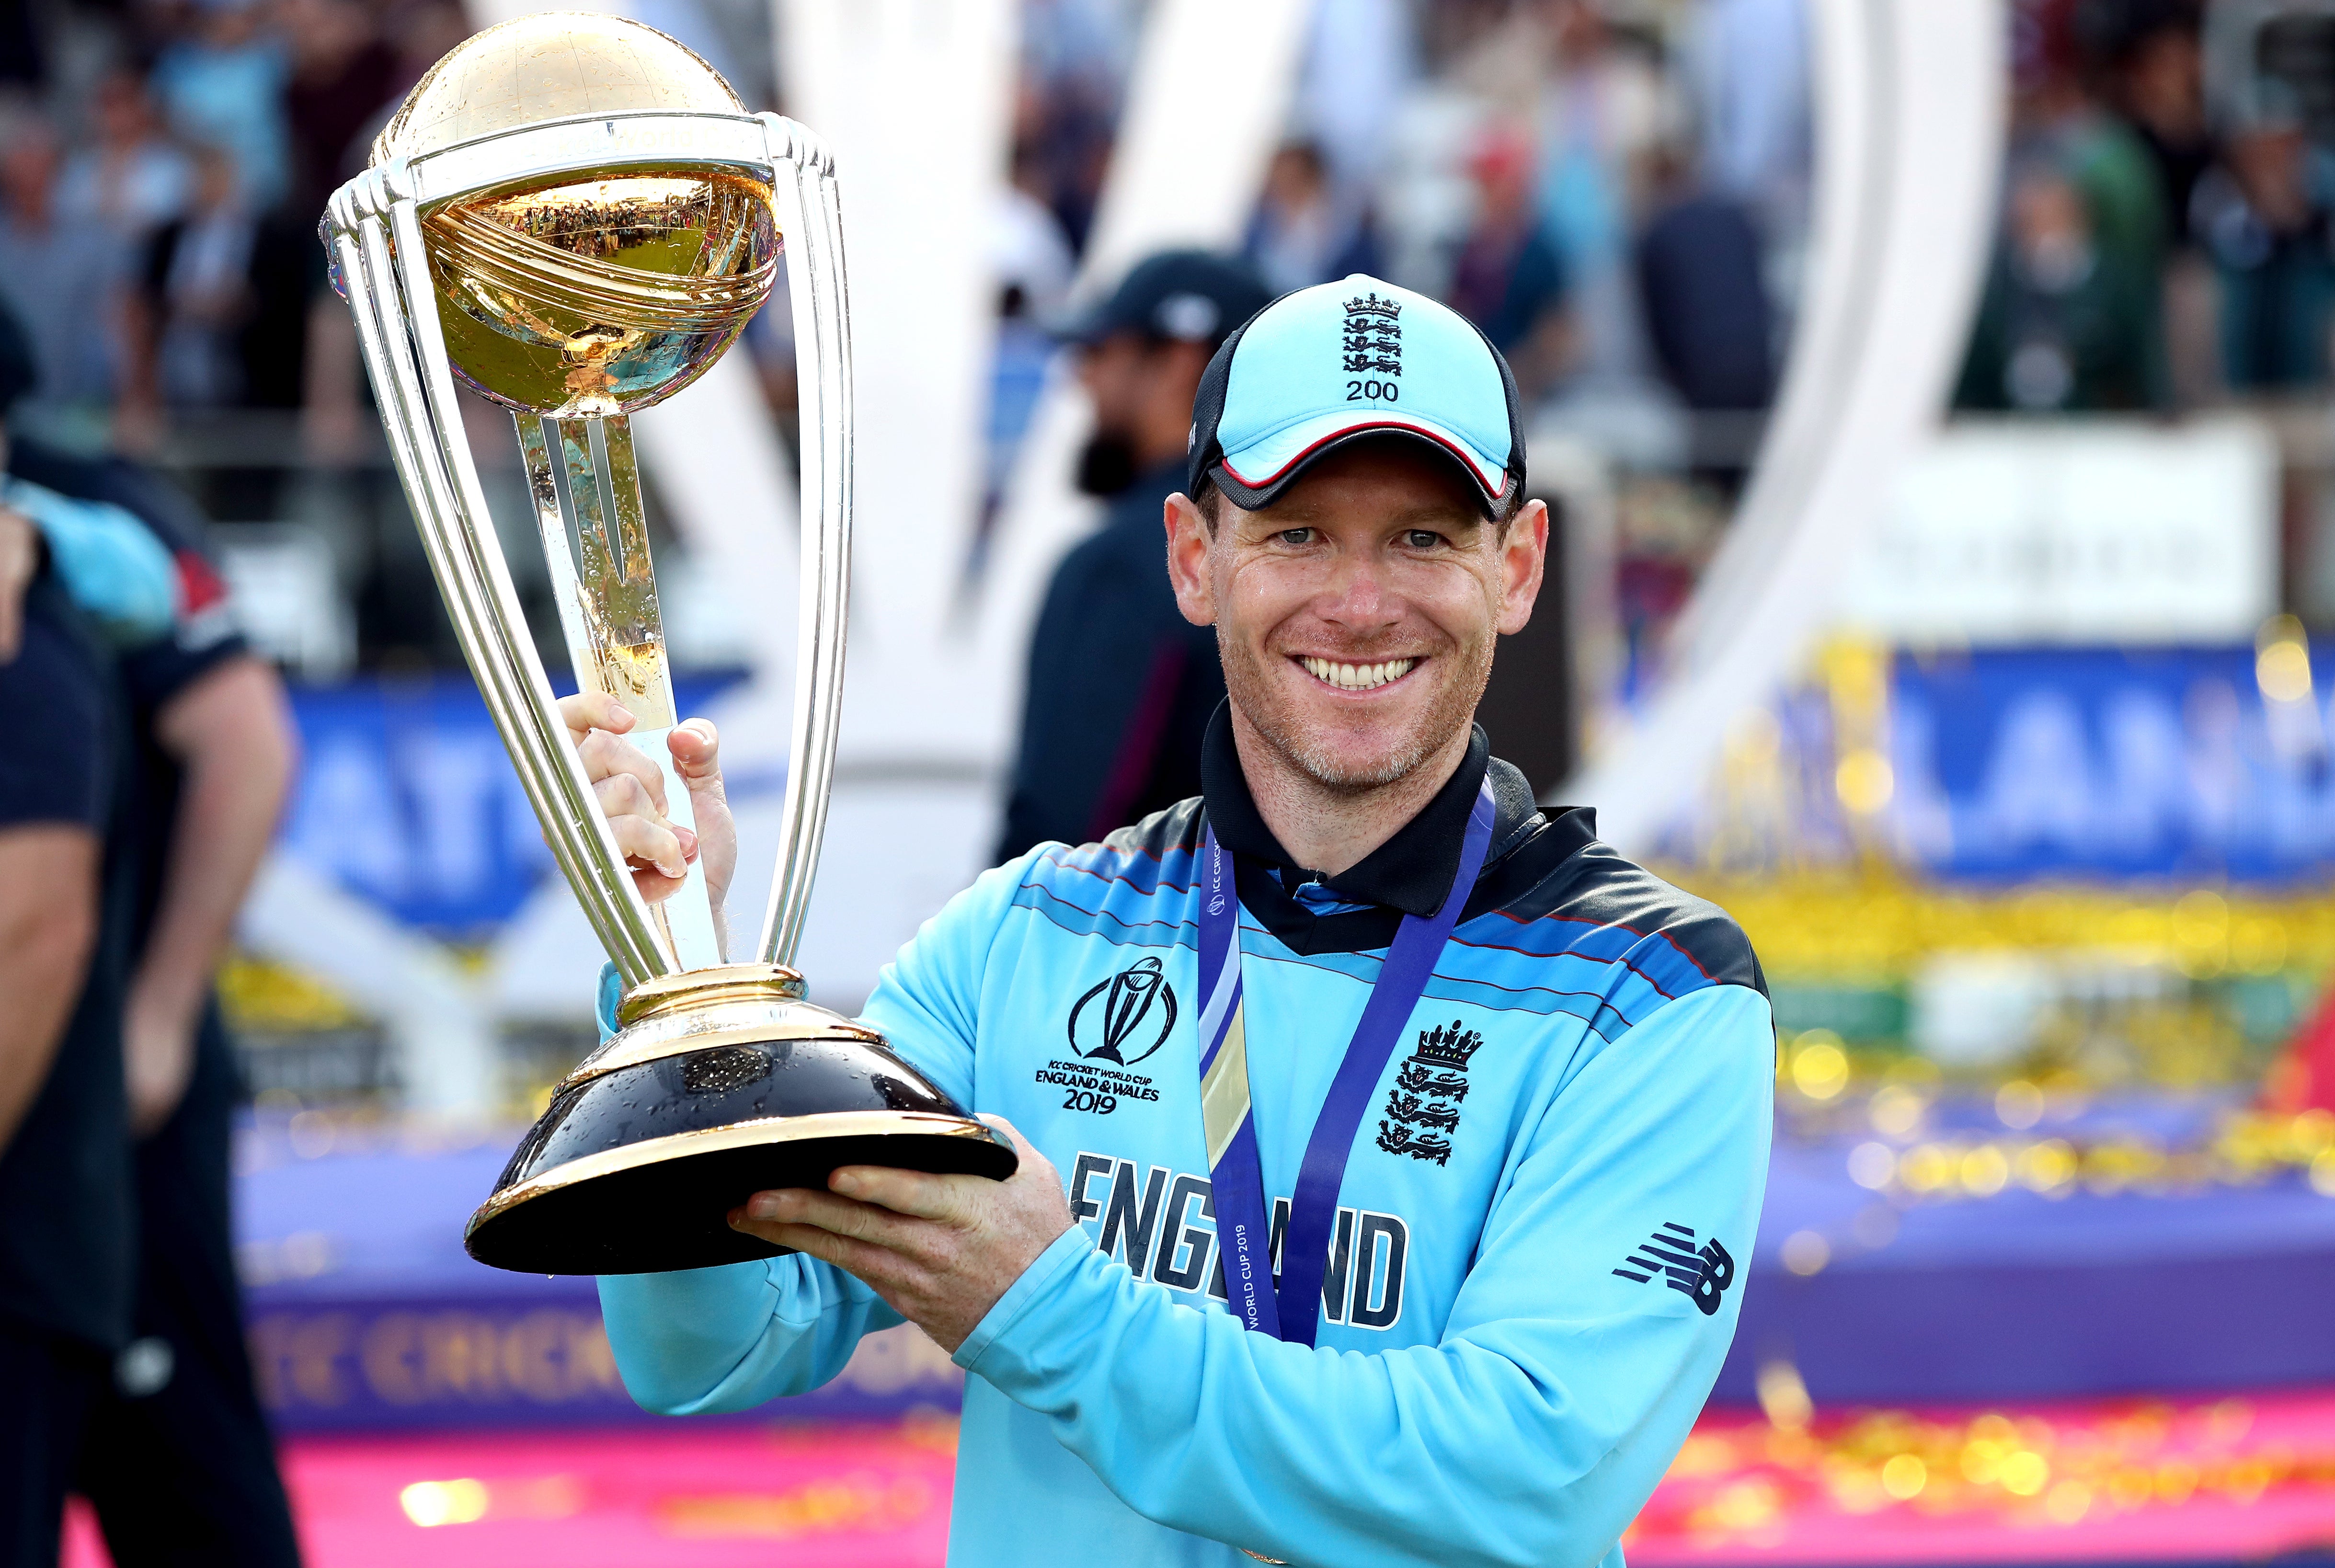 Morgan guided England to the 2019 World Cup (Nick Potts/PA)